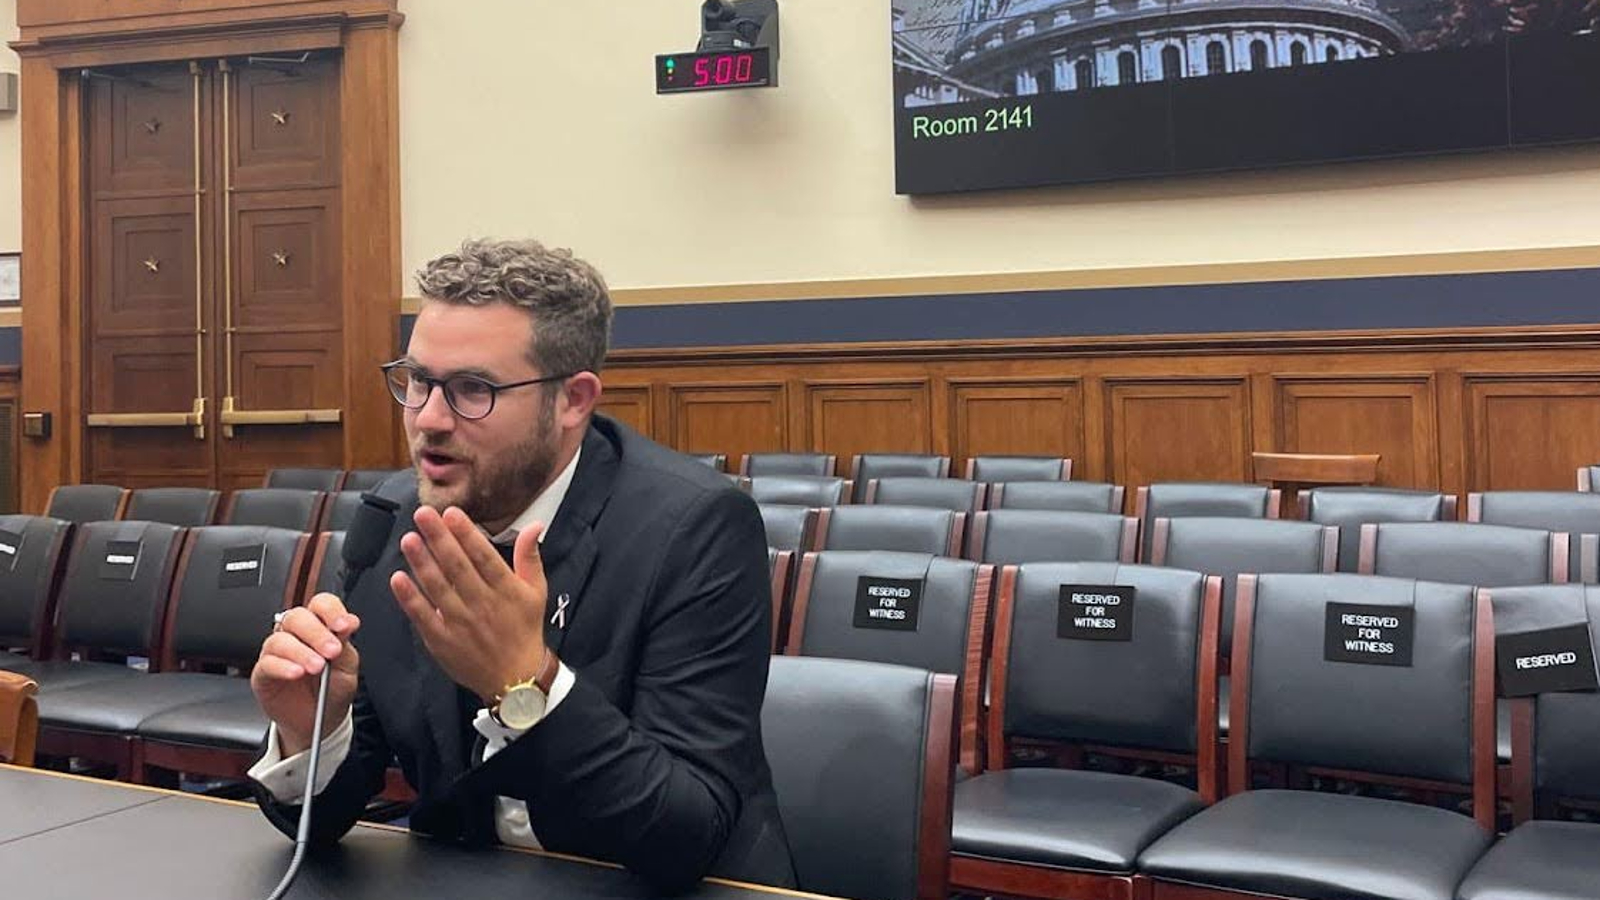 At the beginning of June, Benaya Cherlow, our volunteer from Israel, started a new position as the political advisor to Congressman Brad Schneider